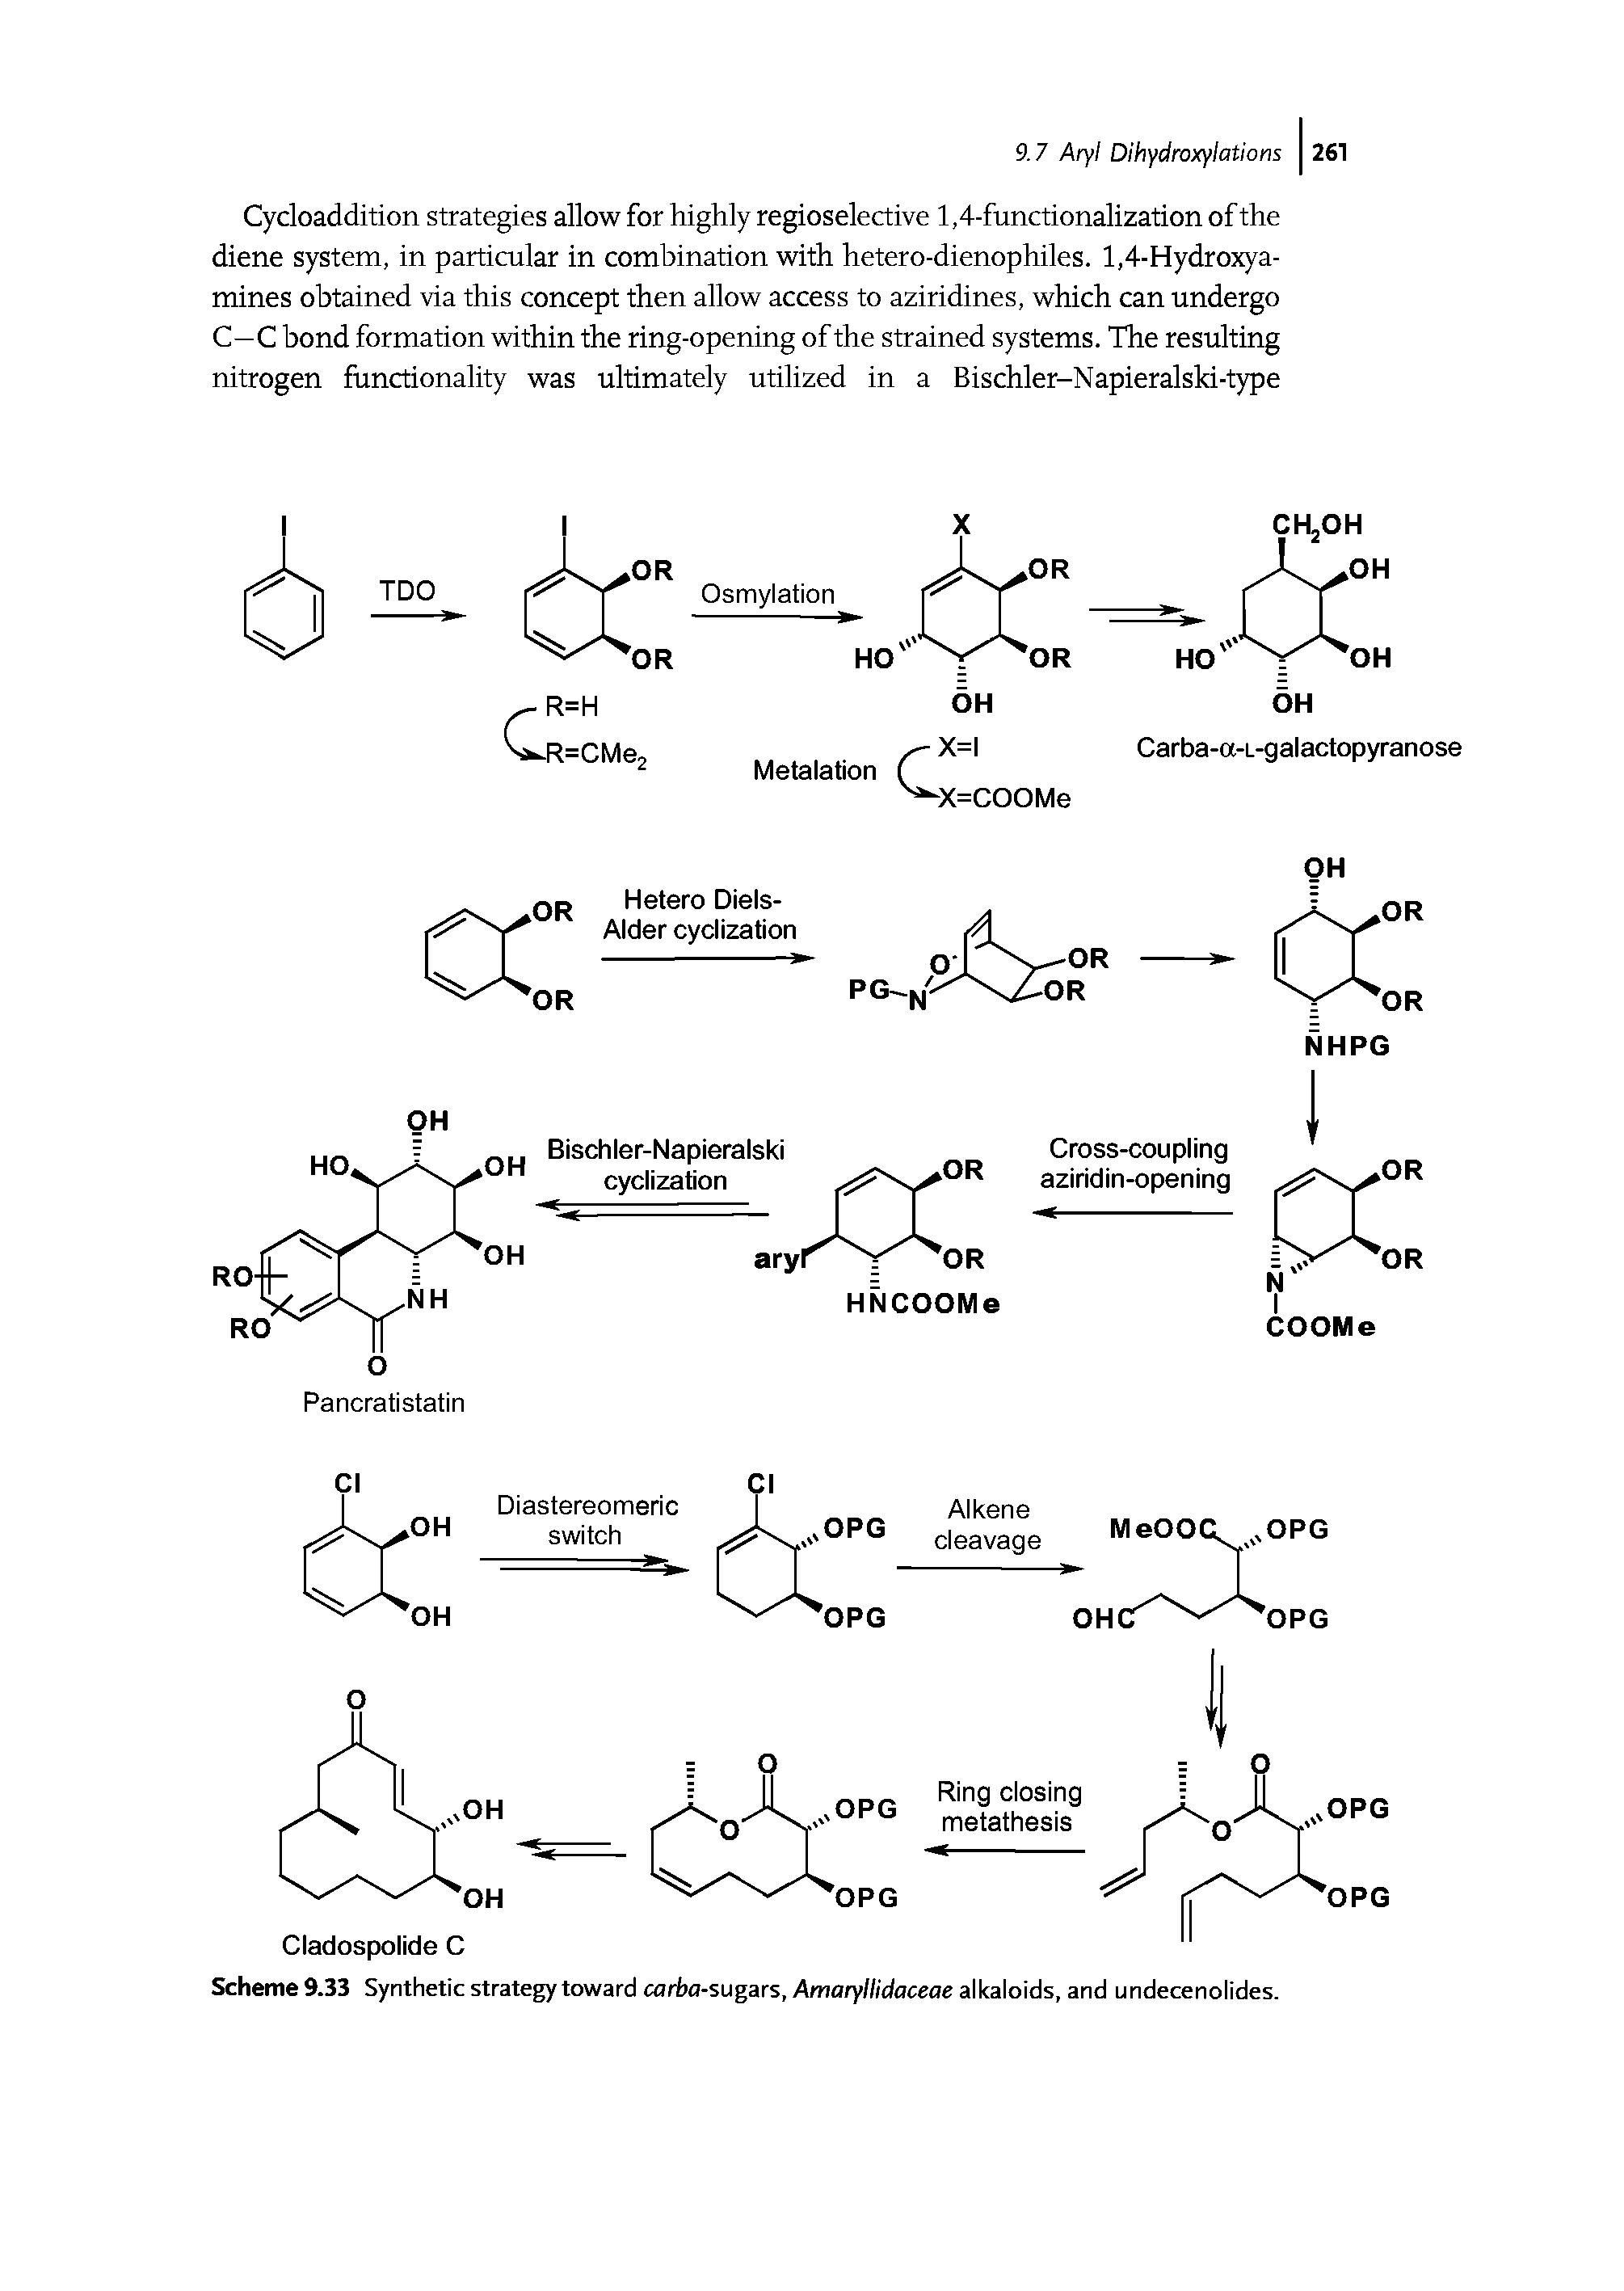 Scheme 9.33 Synthetic strategy toward carba-sugars, Amaryllidaceae alkaloids, and undecenolides.